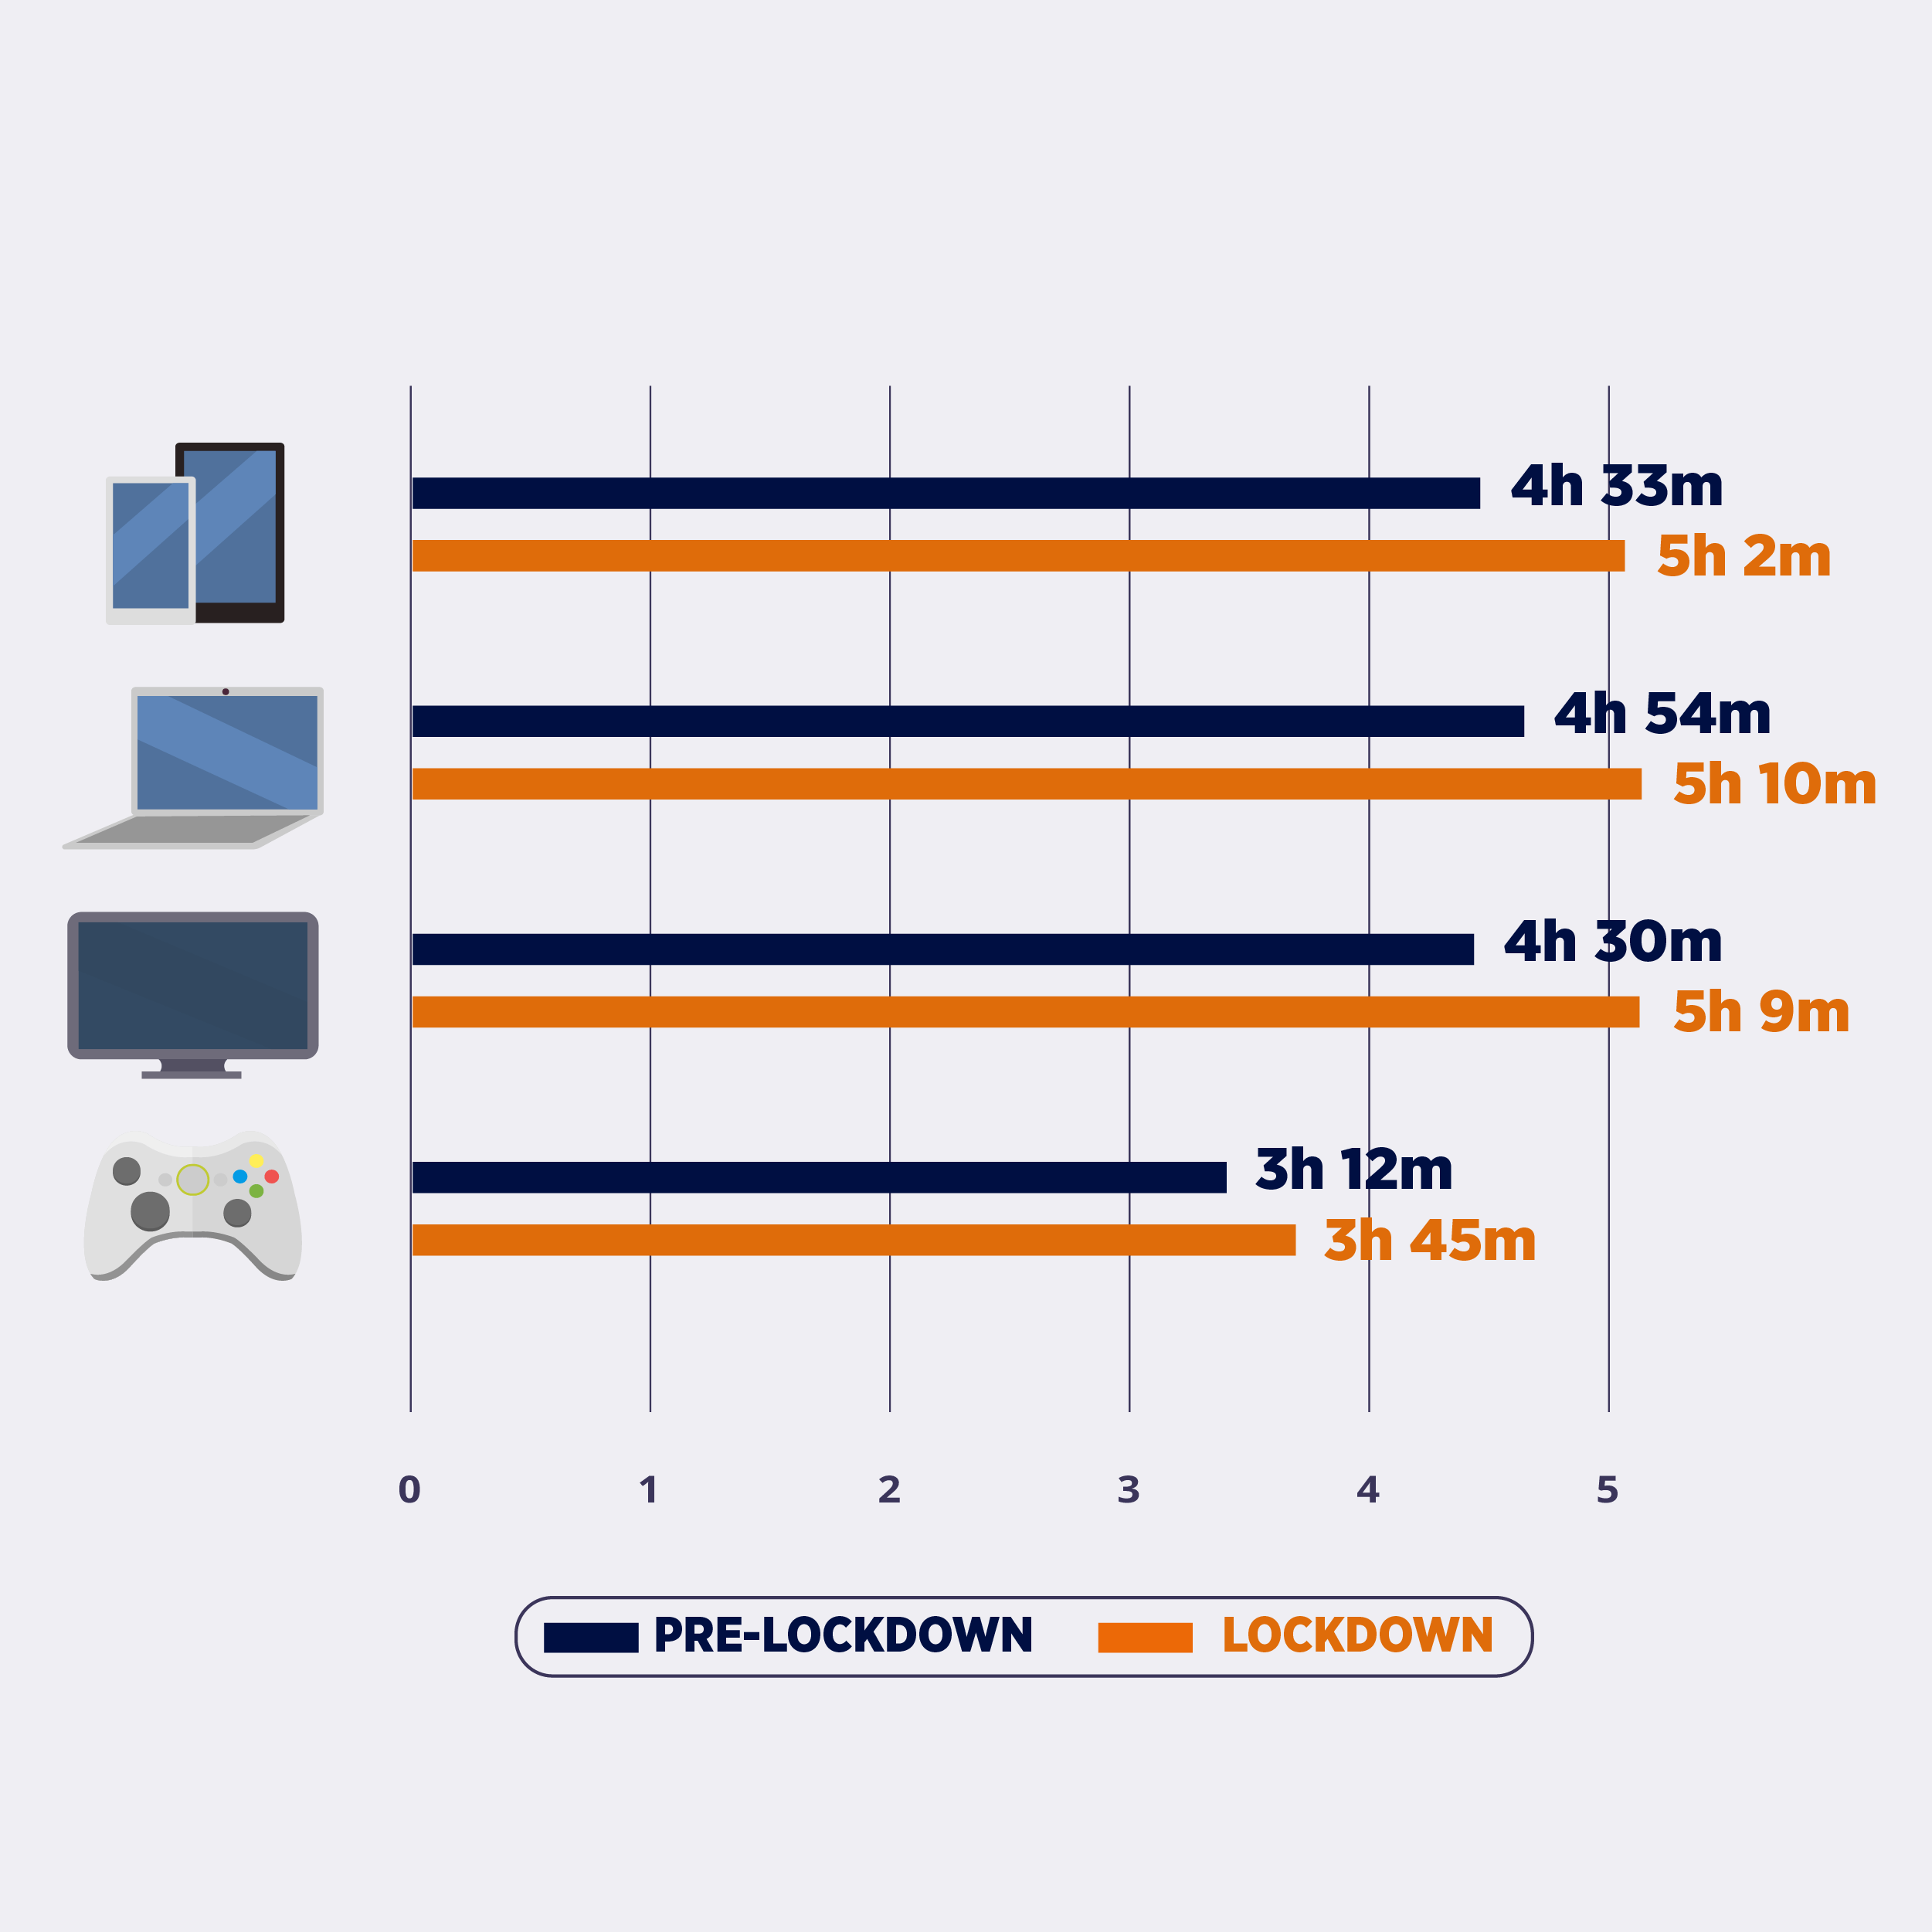 Time spent on different devices